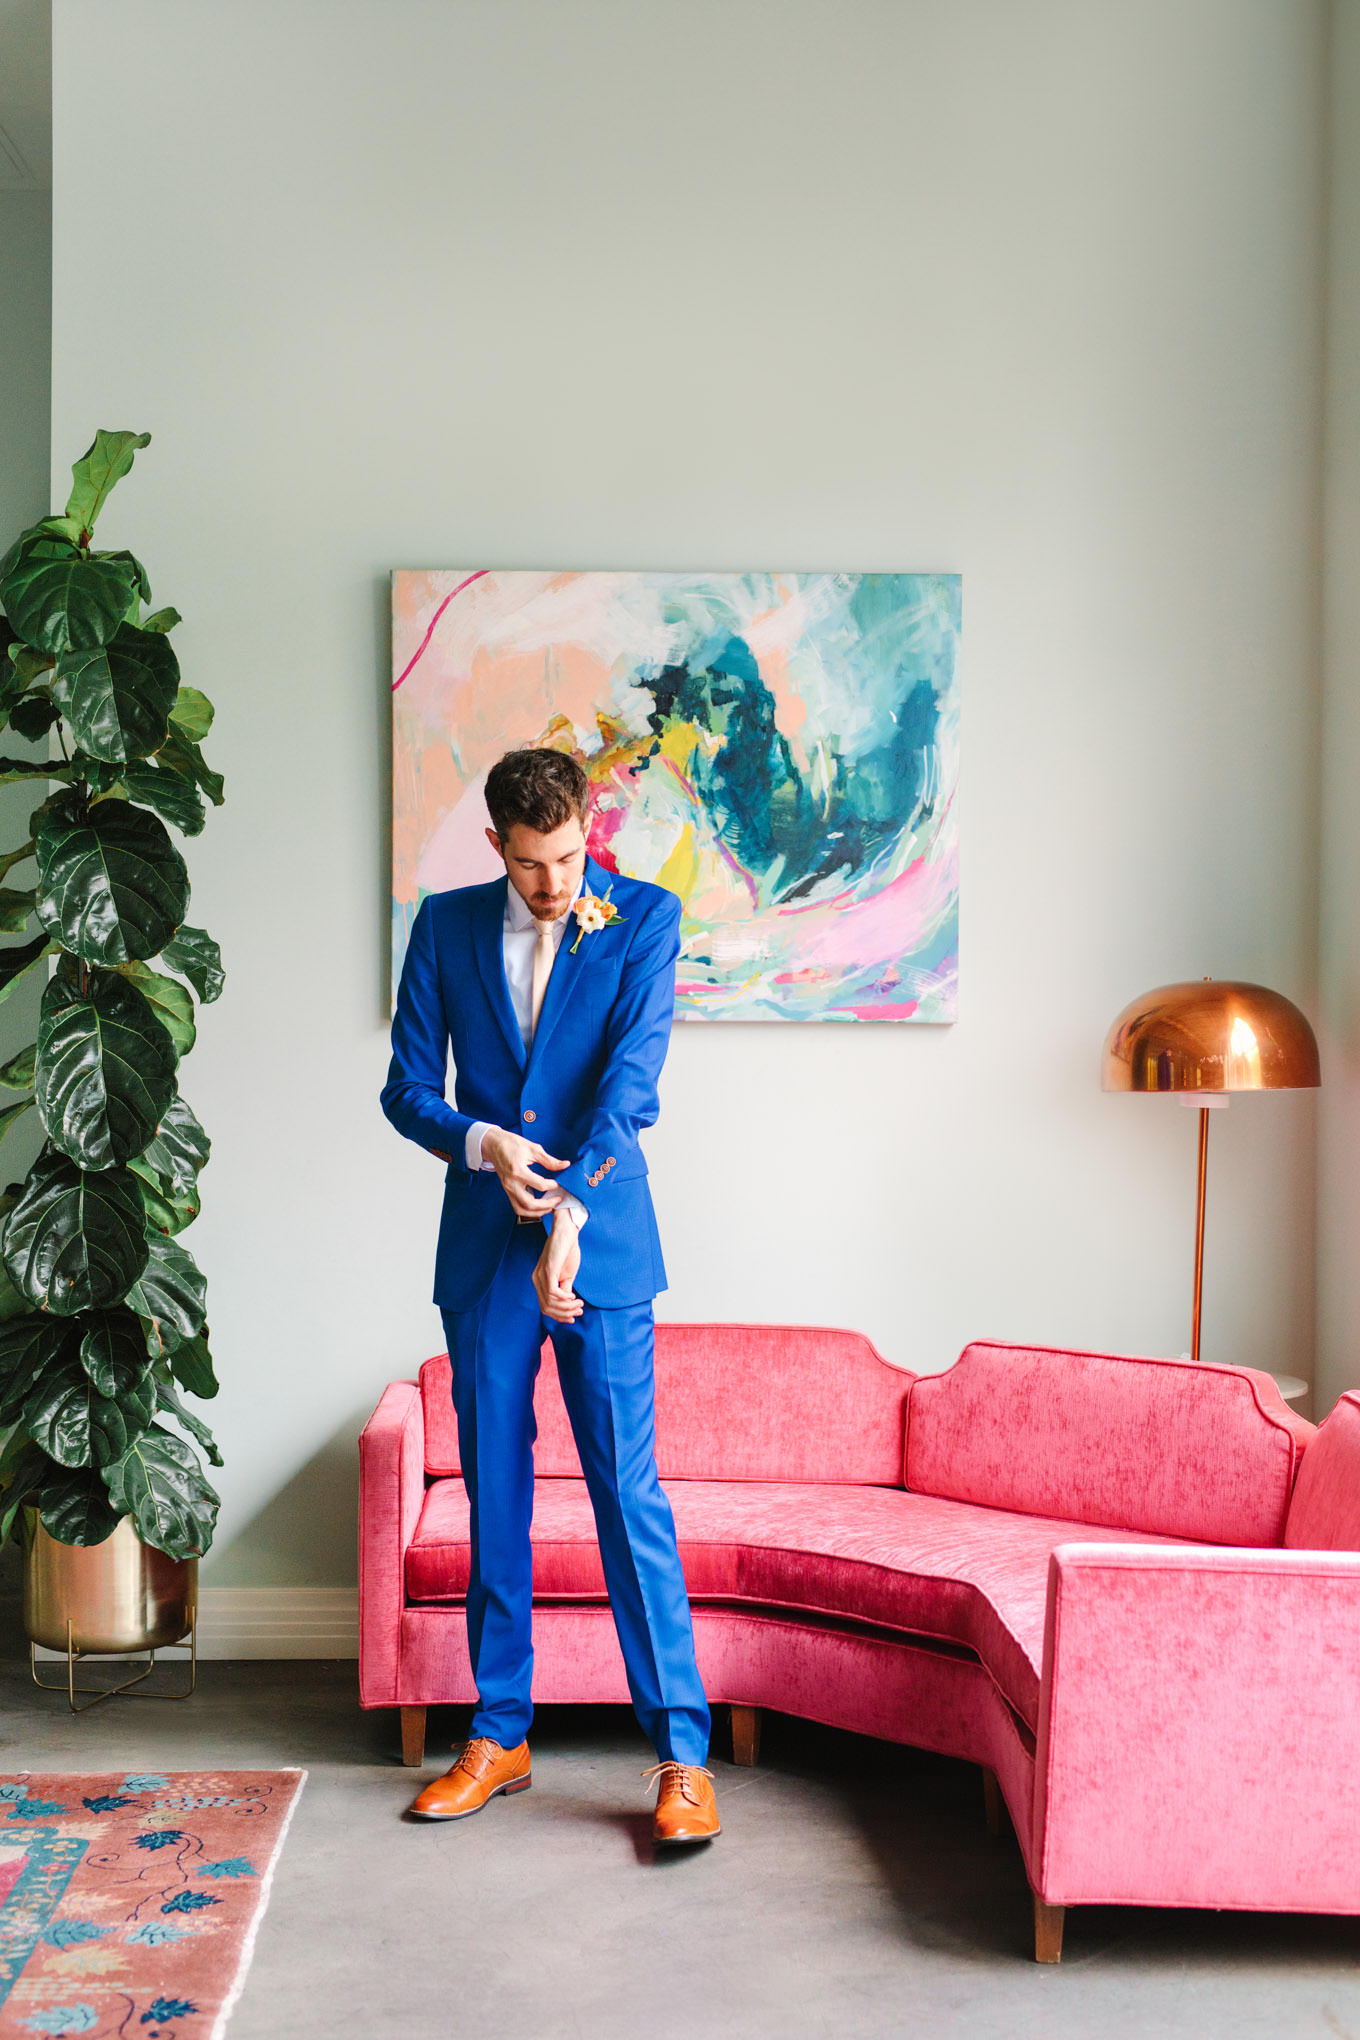 Groom getting ready in bright blue suit | TV inspired wedding at The Fig House Los Angeles | Published on The Knot | Fresh and colorful photography for fun-loving couples in Southern California | #losangeleswedding #TVwedding #colorfulwedding #theknot   Source: Mary Costa Photography | Los Angeles wedding photographer